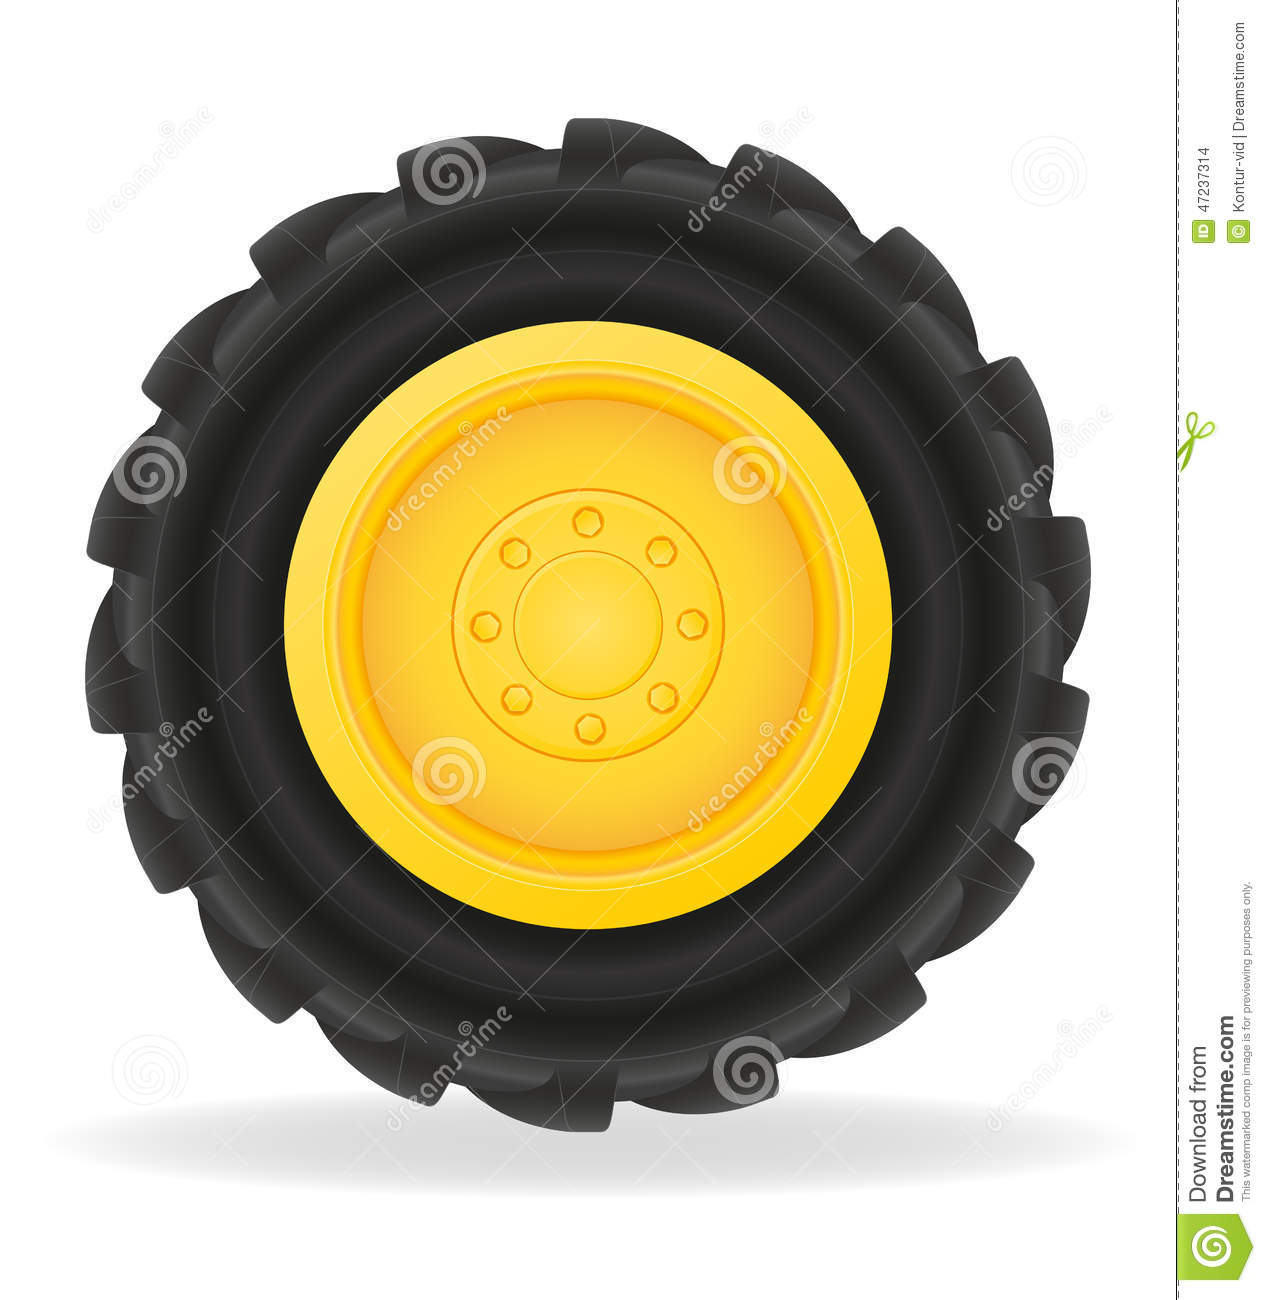 Wheel For Tractor Vector Illustration Stock Vector - Image ...